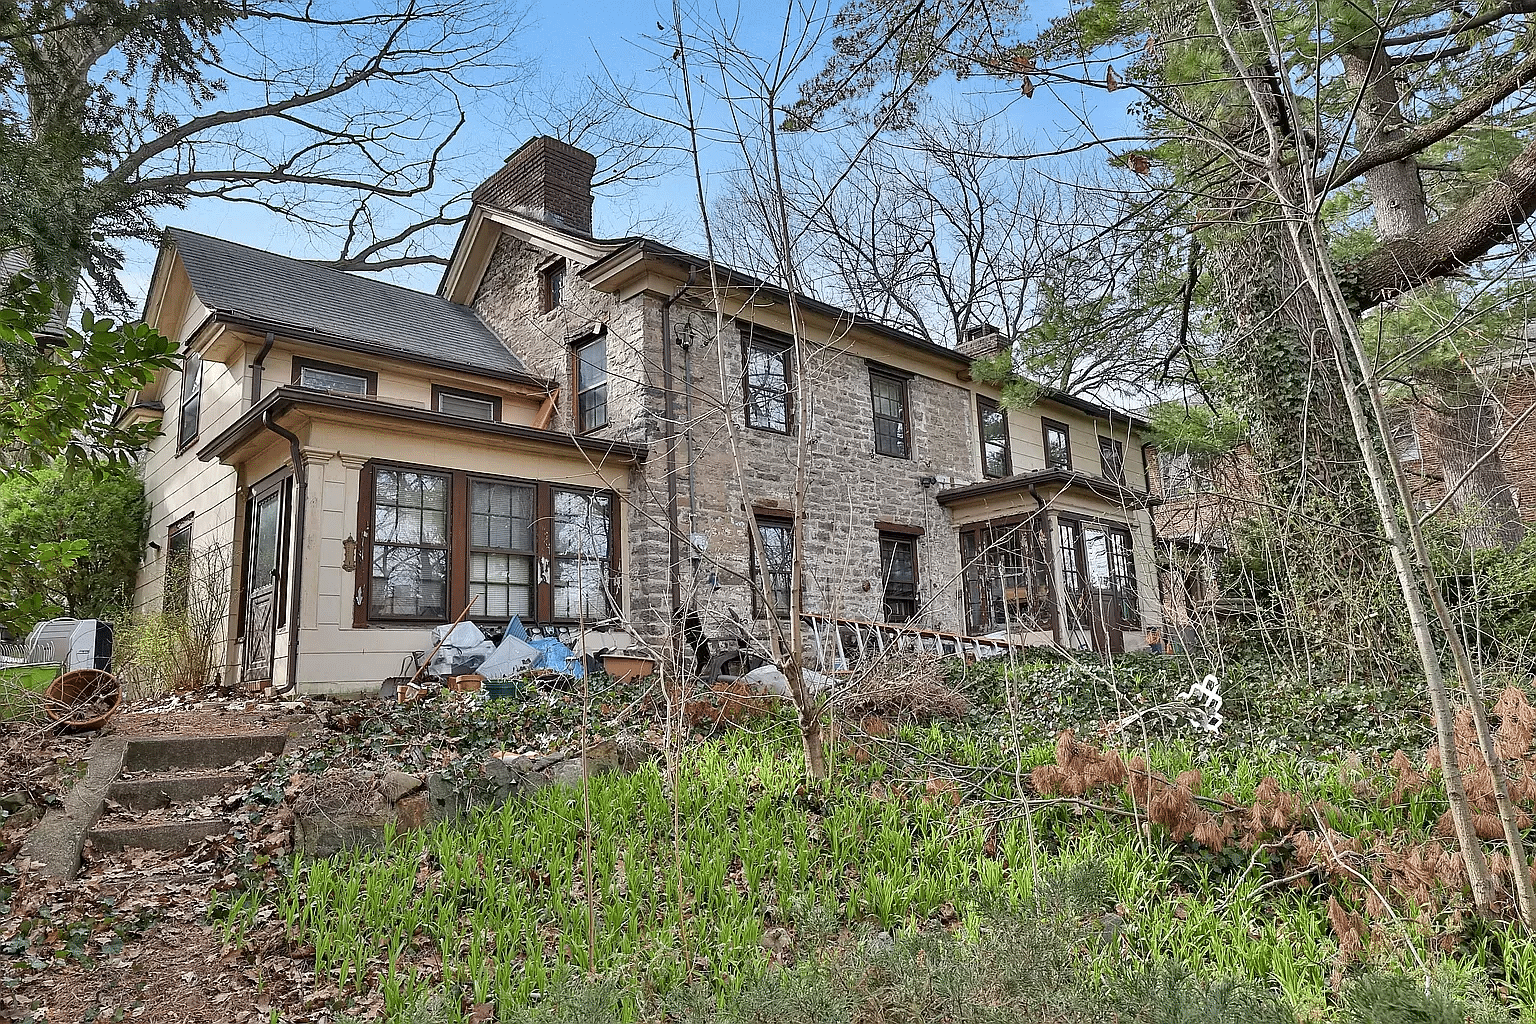 rear of the hadley house showing stone and frame sections